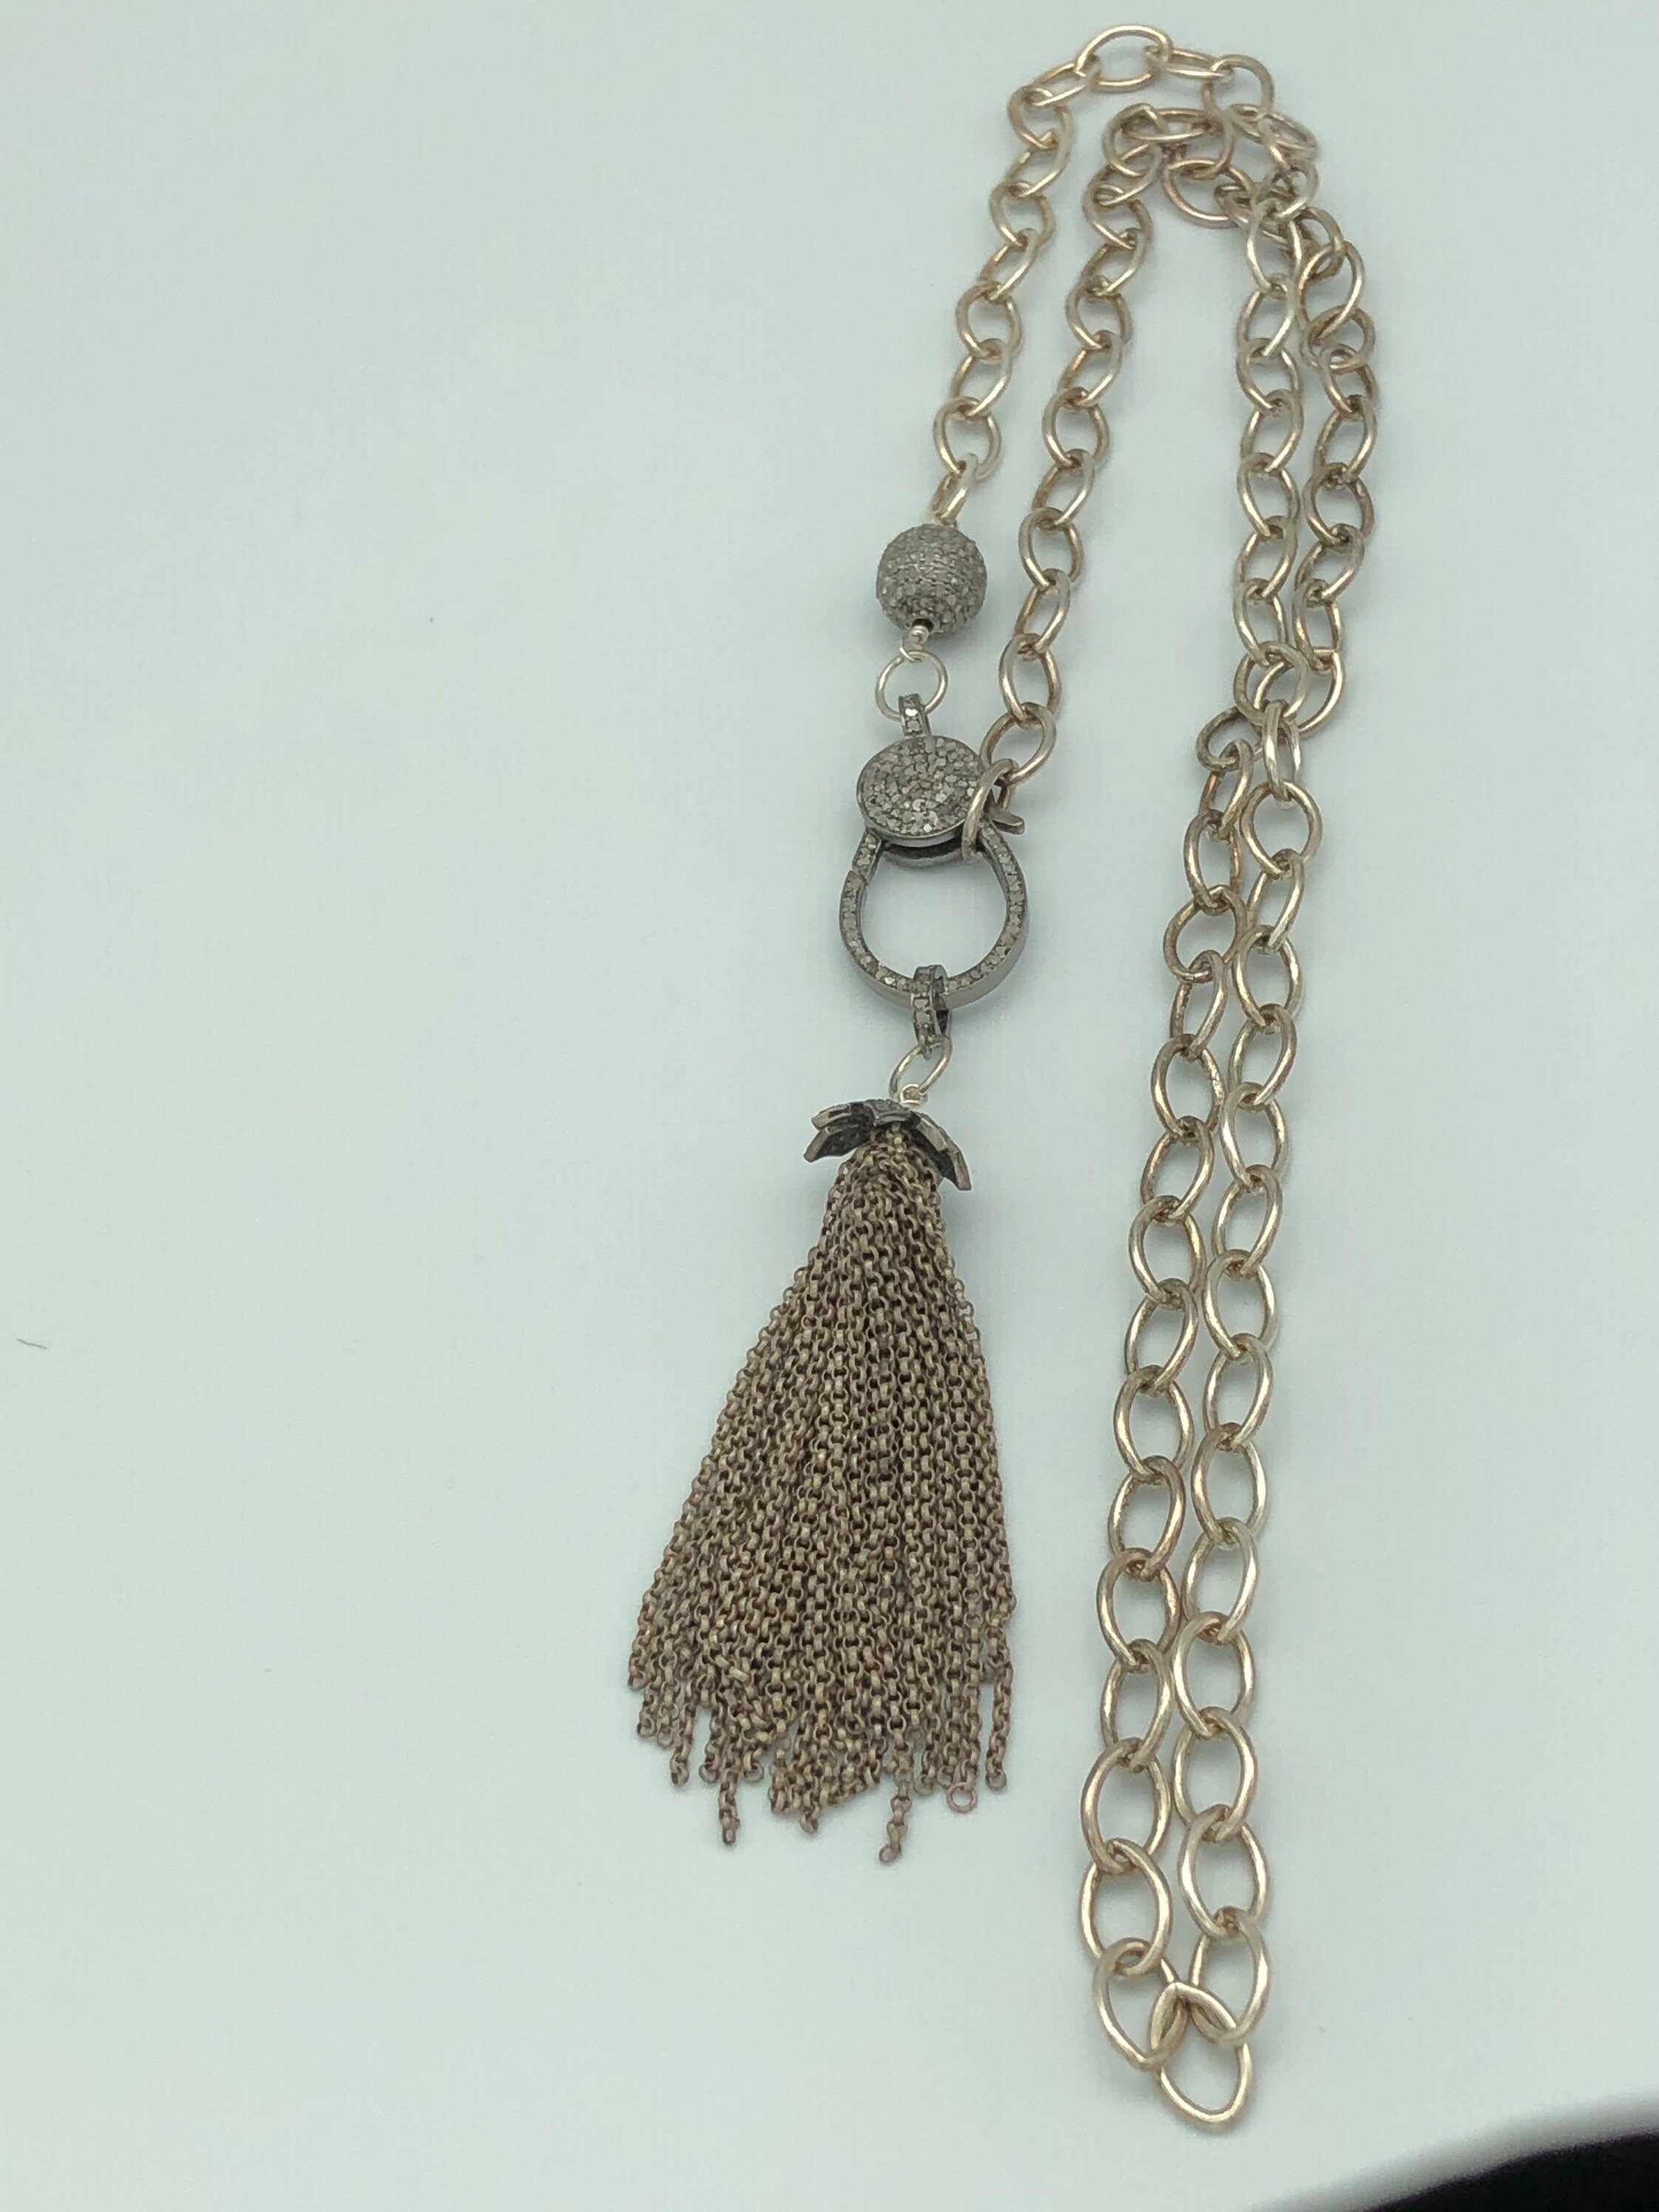 Pave Diamonds With a Chain Tassel Necklace - Etsy